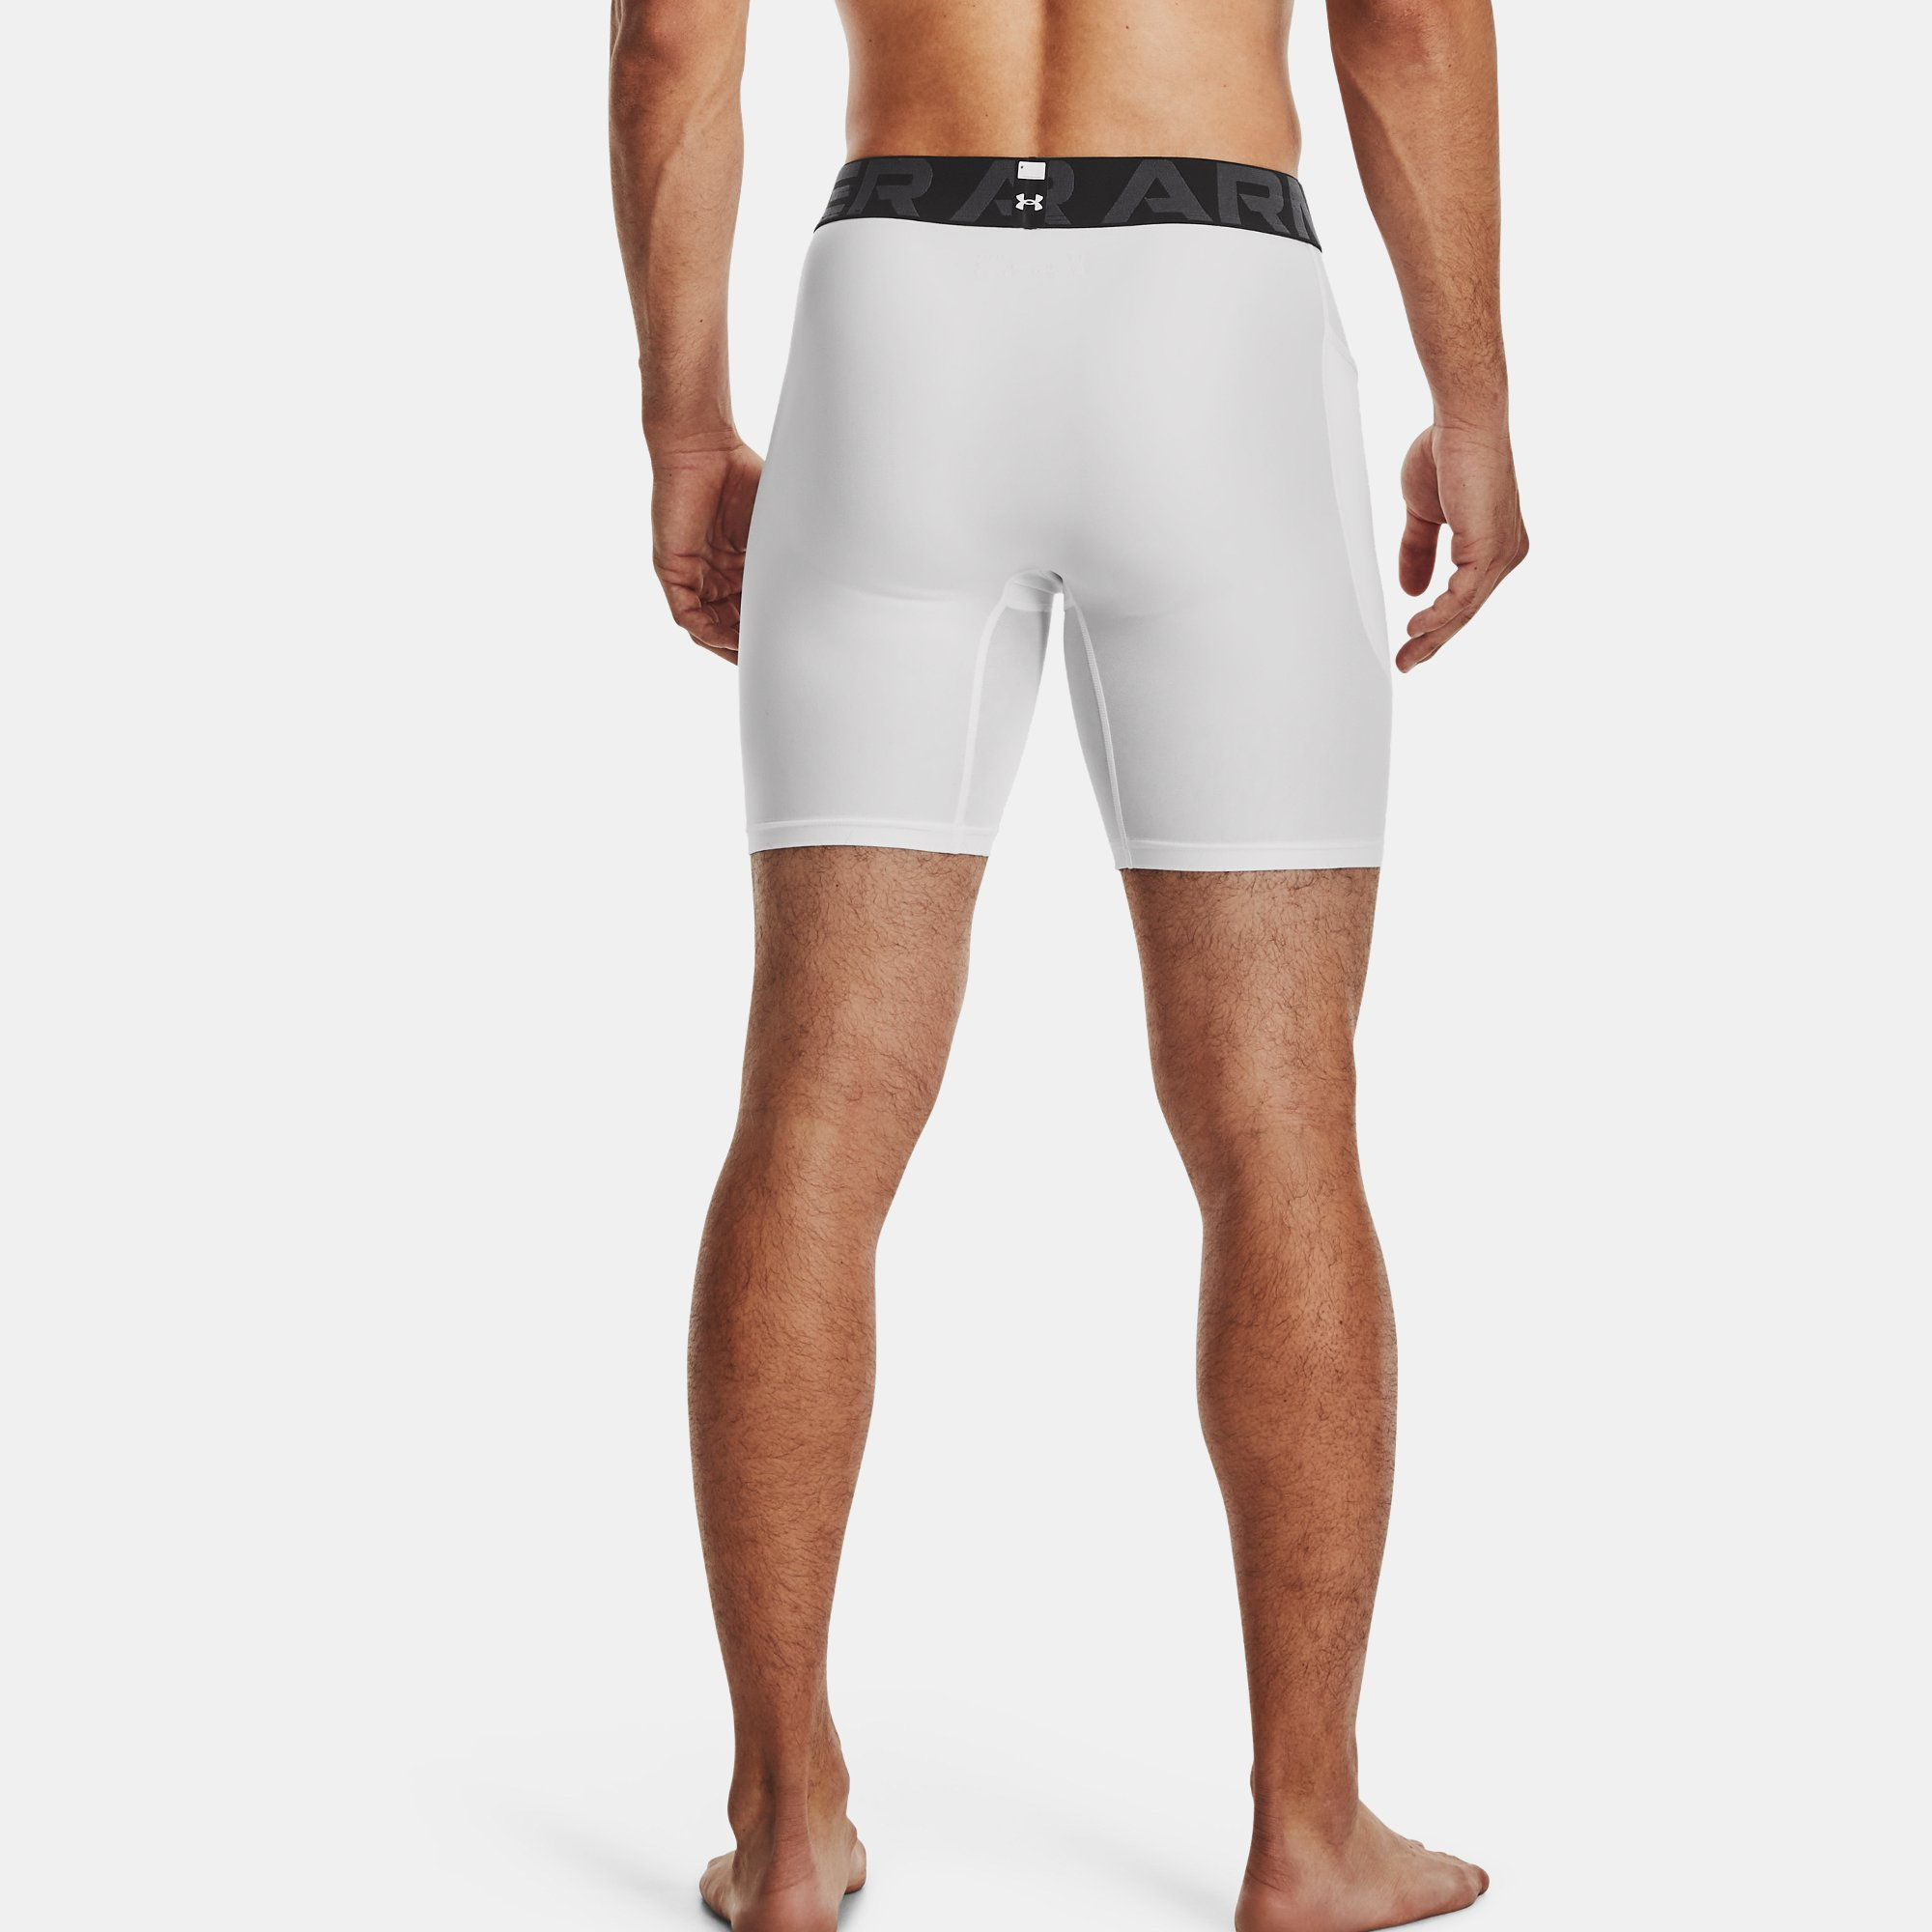 Under Armour HeatGear Armour Compression Shorts - White